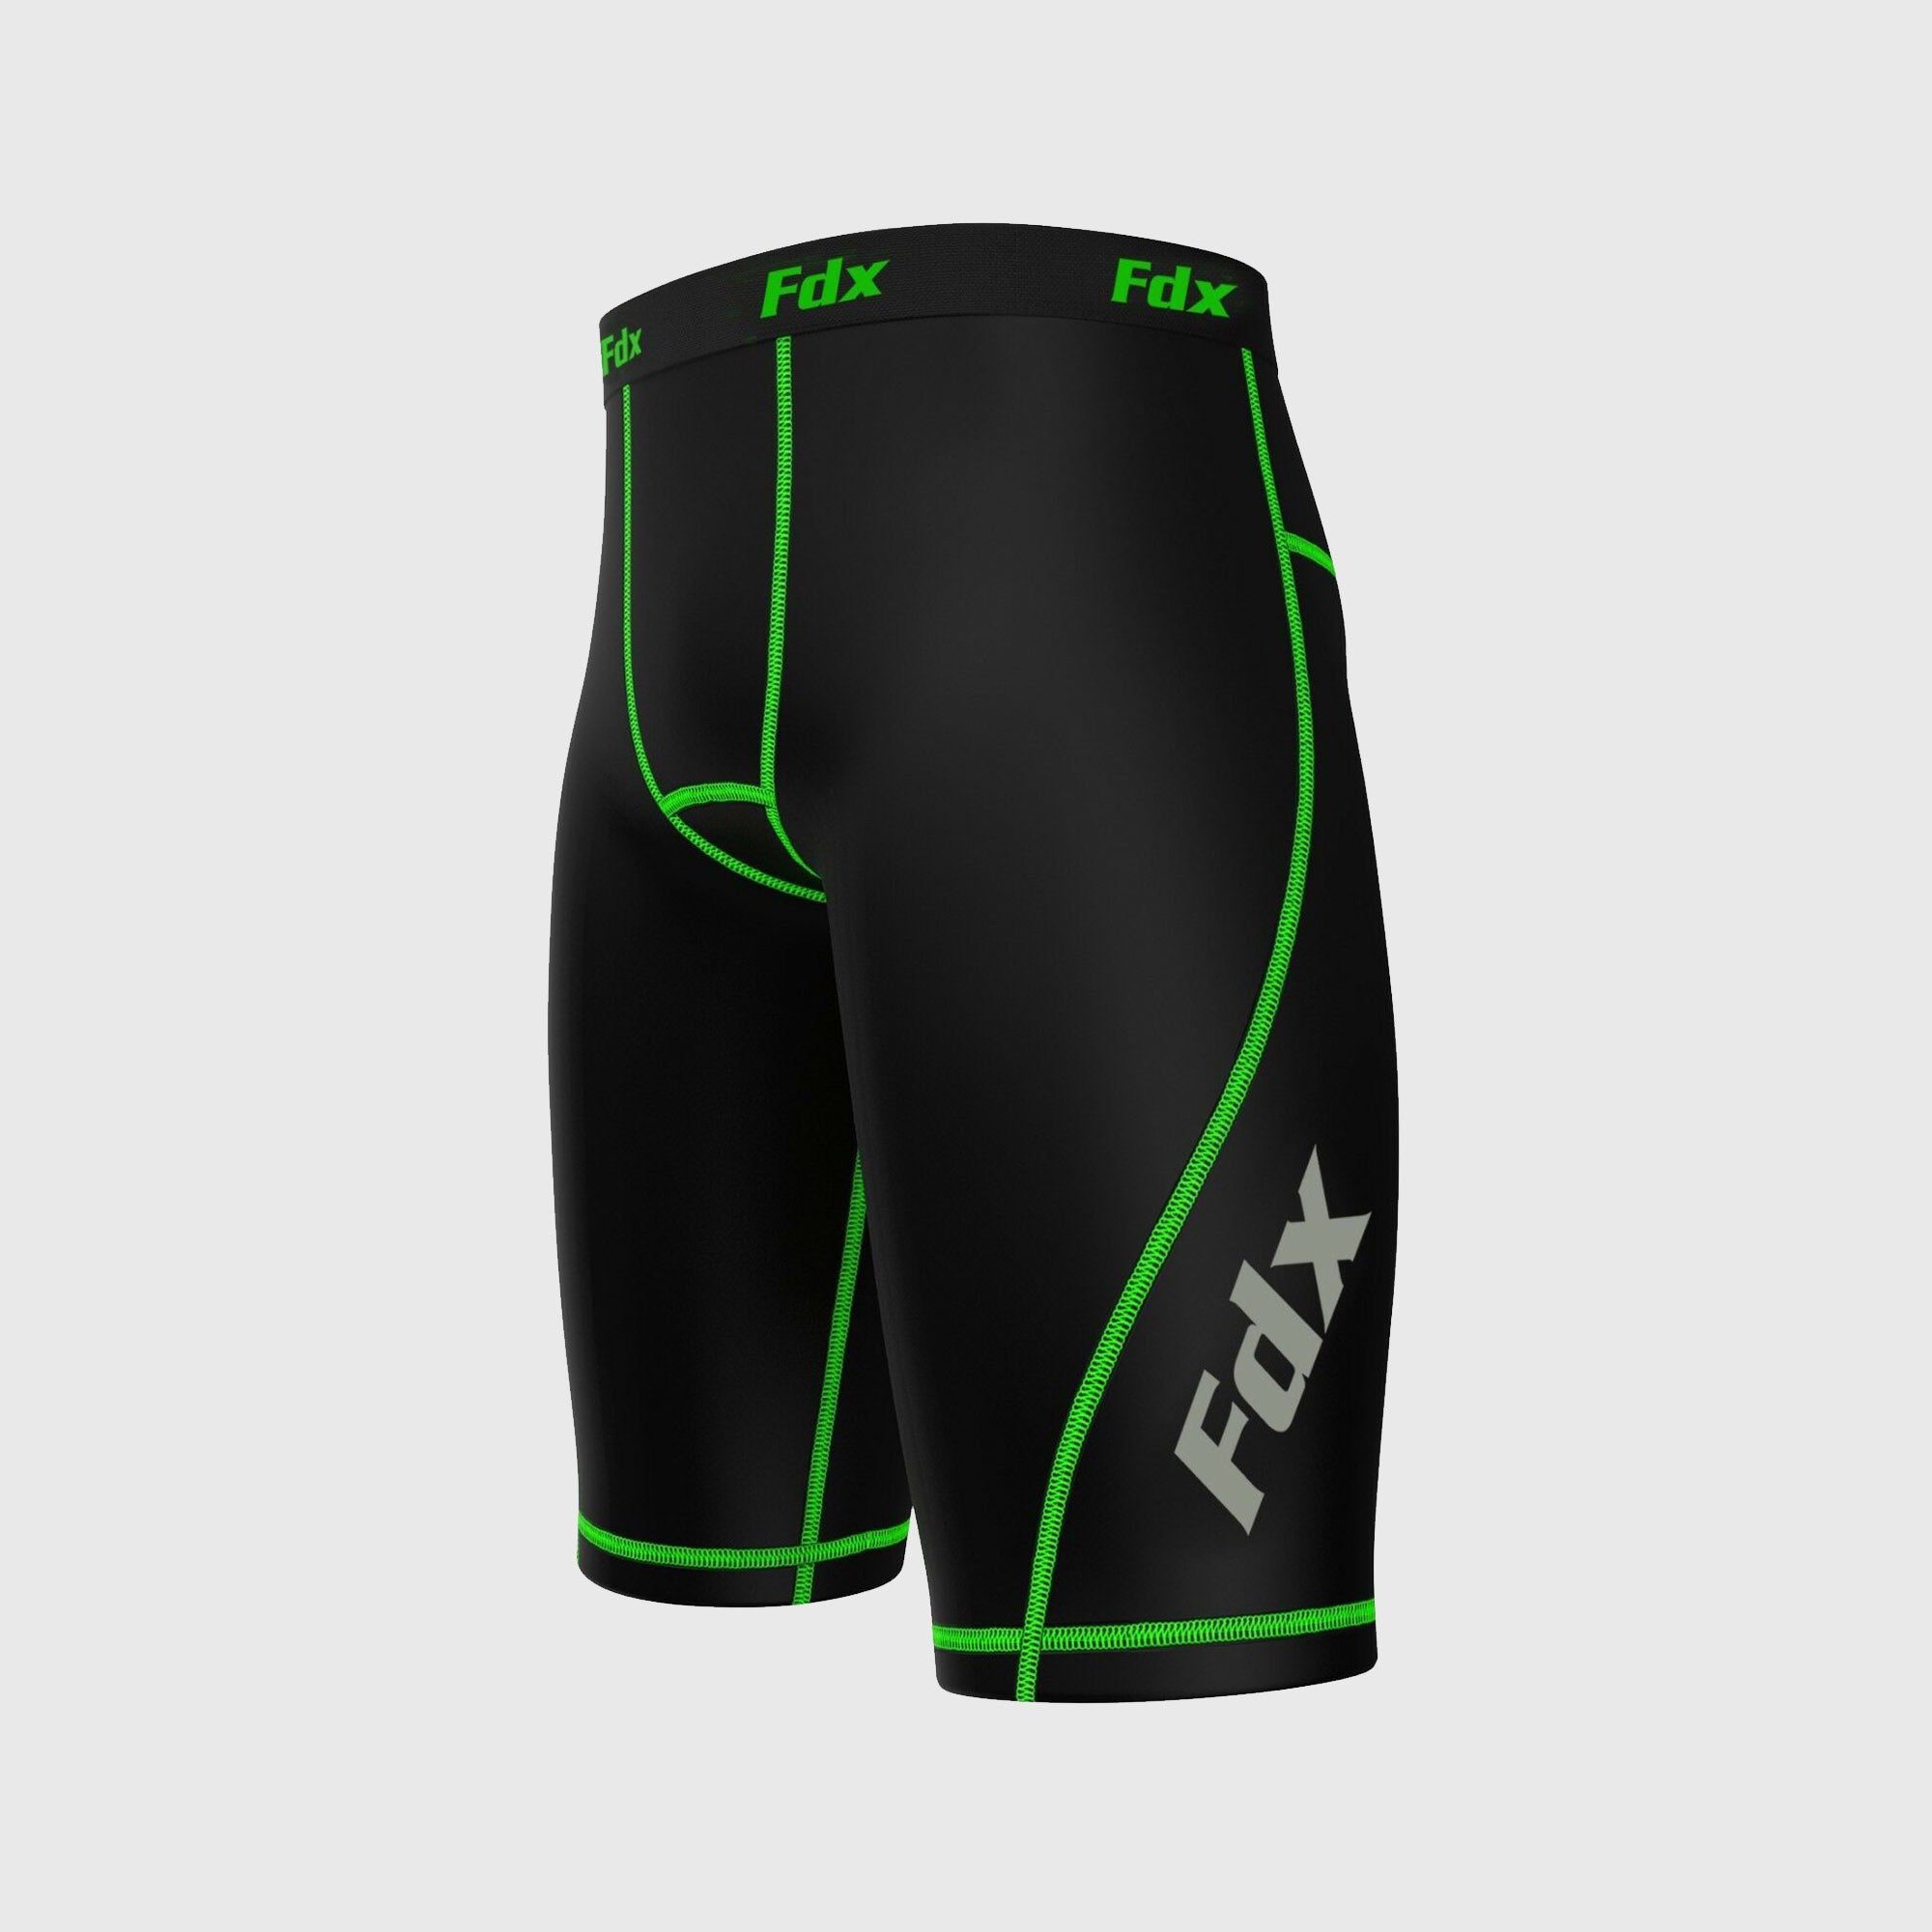 Fdx Men's Black & Green Compression Shorts Gym Workout Running Athletic Yoga Elastic Waistband Stretchable Breathable